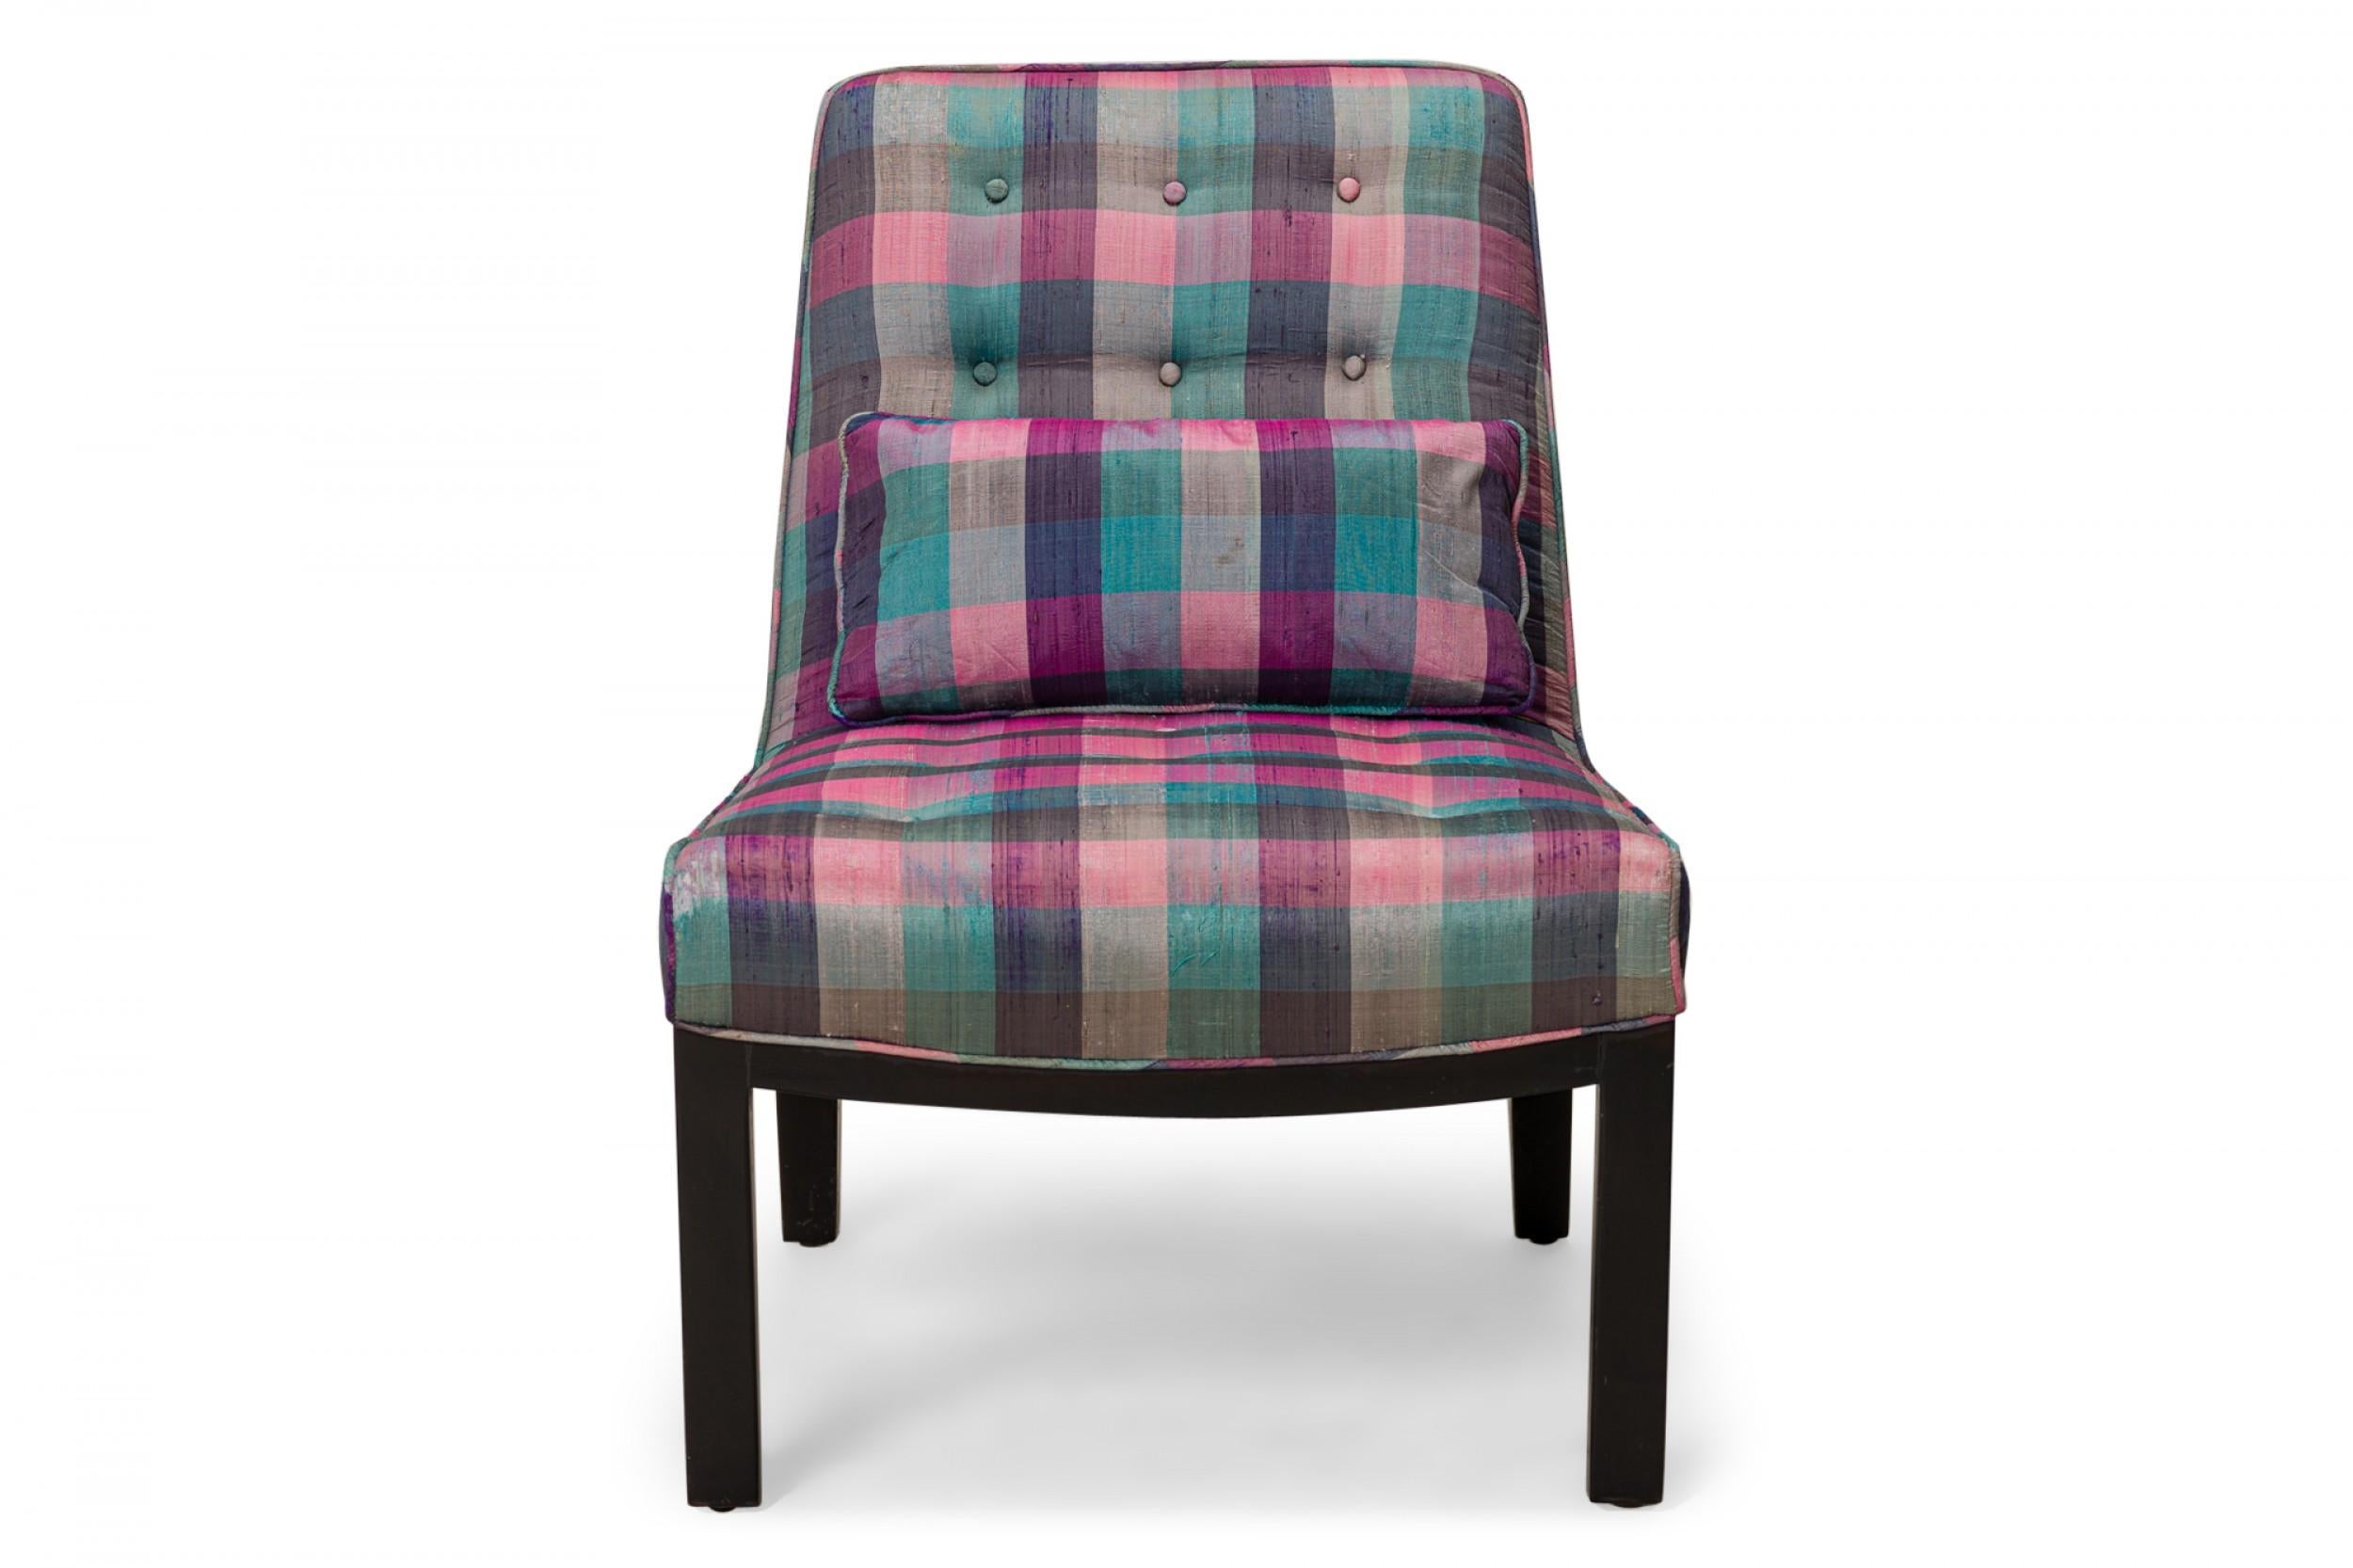 American Mid-Century slipper / side chair with purple, pink, and blue plaid fabric upholstery with button tufting and a matching rectangular throw pillow, resting on four square ebonized wooden legs. (EDWARD WORMLEY FOR DUNBAR FURNITURE COMPANY).